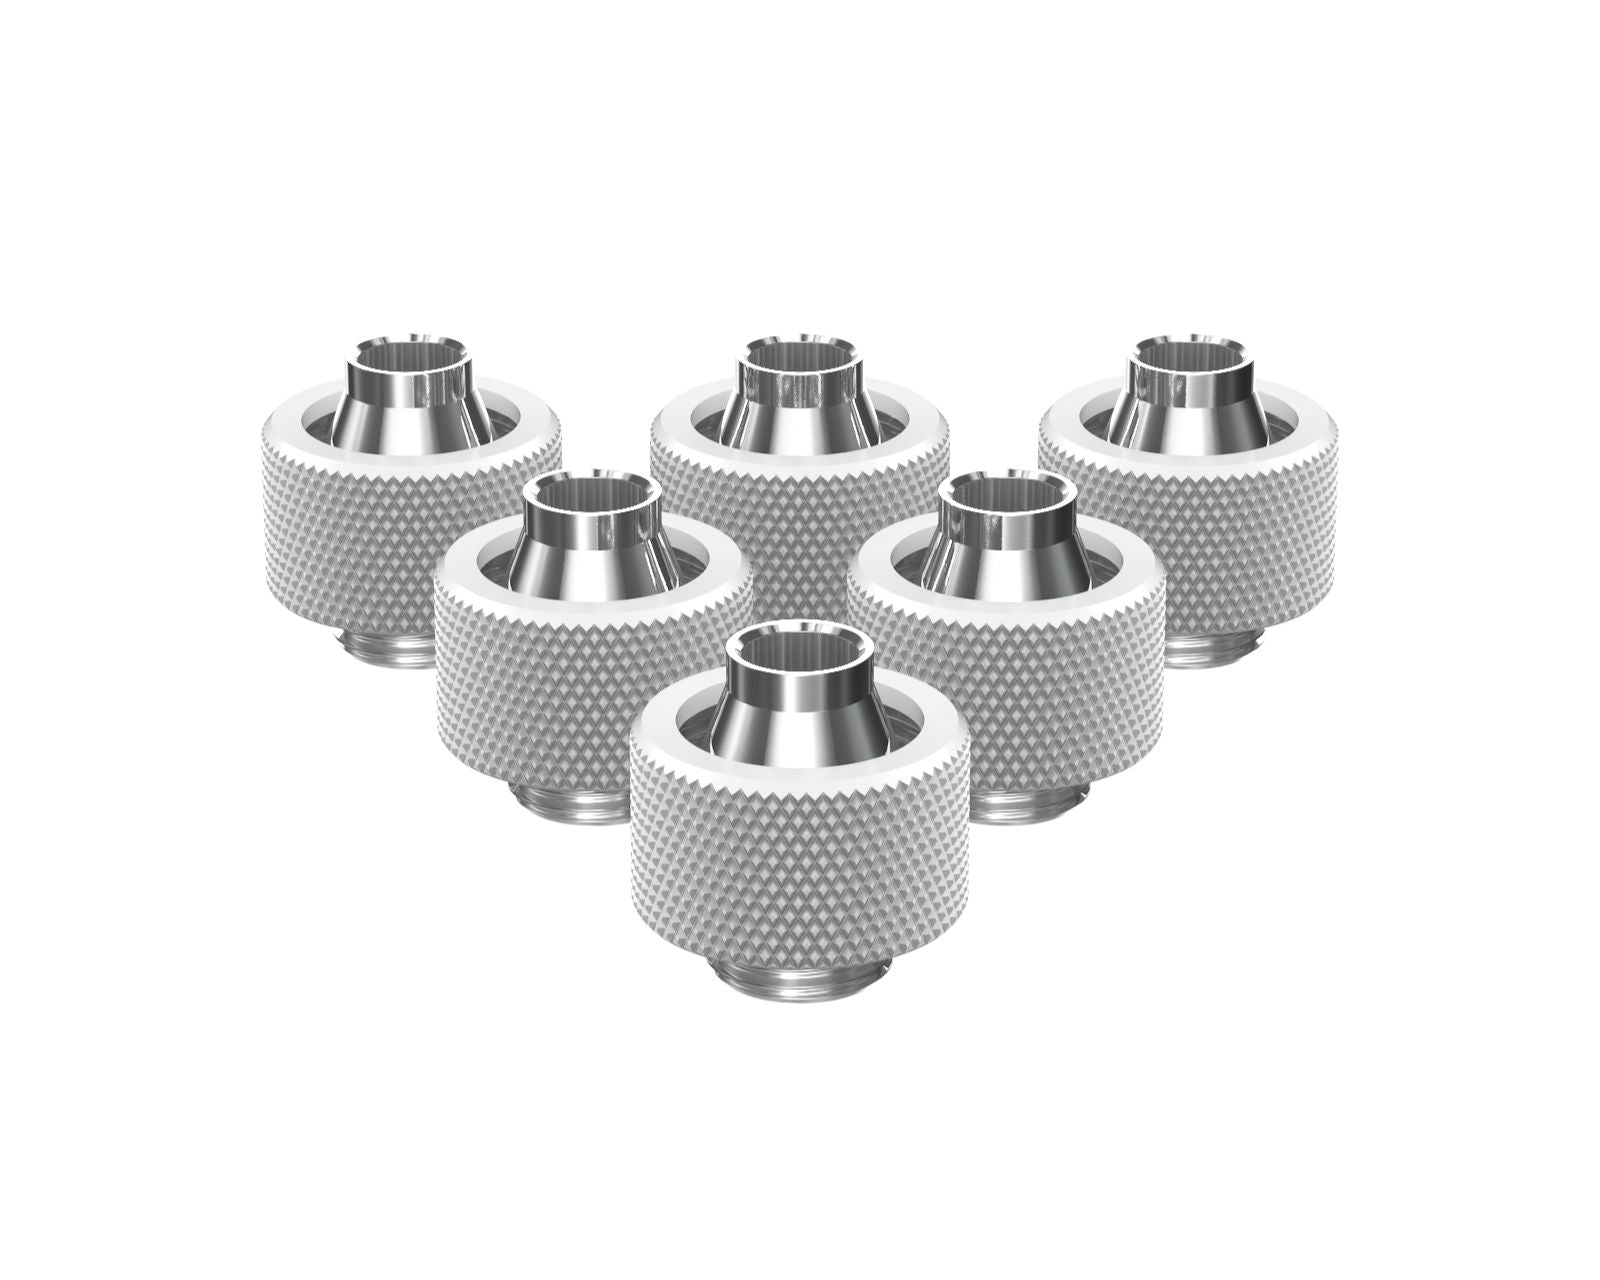 PrimoChill SecureFit SX - Premium Compression Fitting For 3/8in ID x 5/8in OD Flexible Tubing 6 Pack (F-SFSX58-6) - Available in 20+ Colors, Custom Watercooling Loop Ready - Sky White